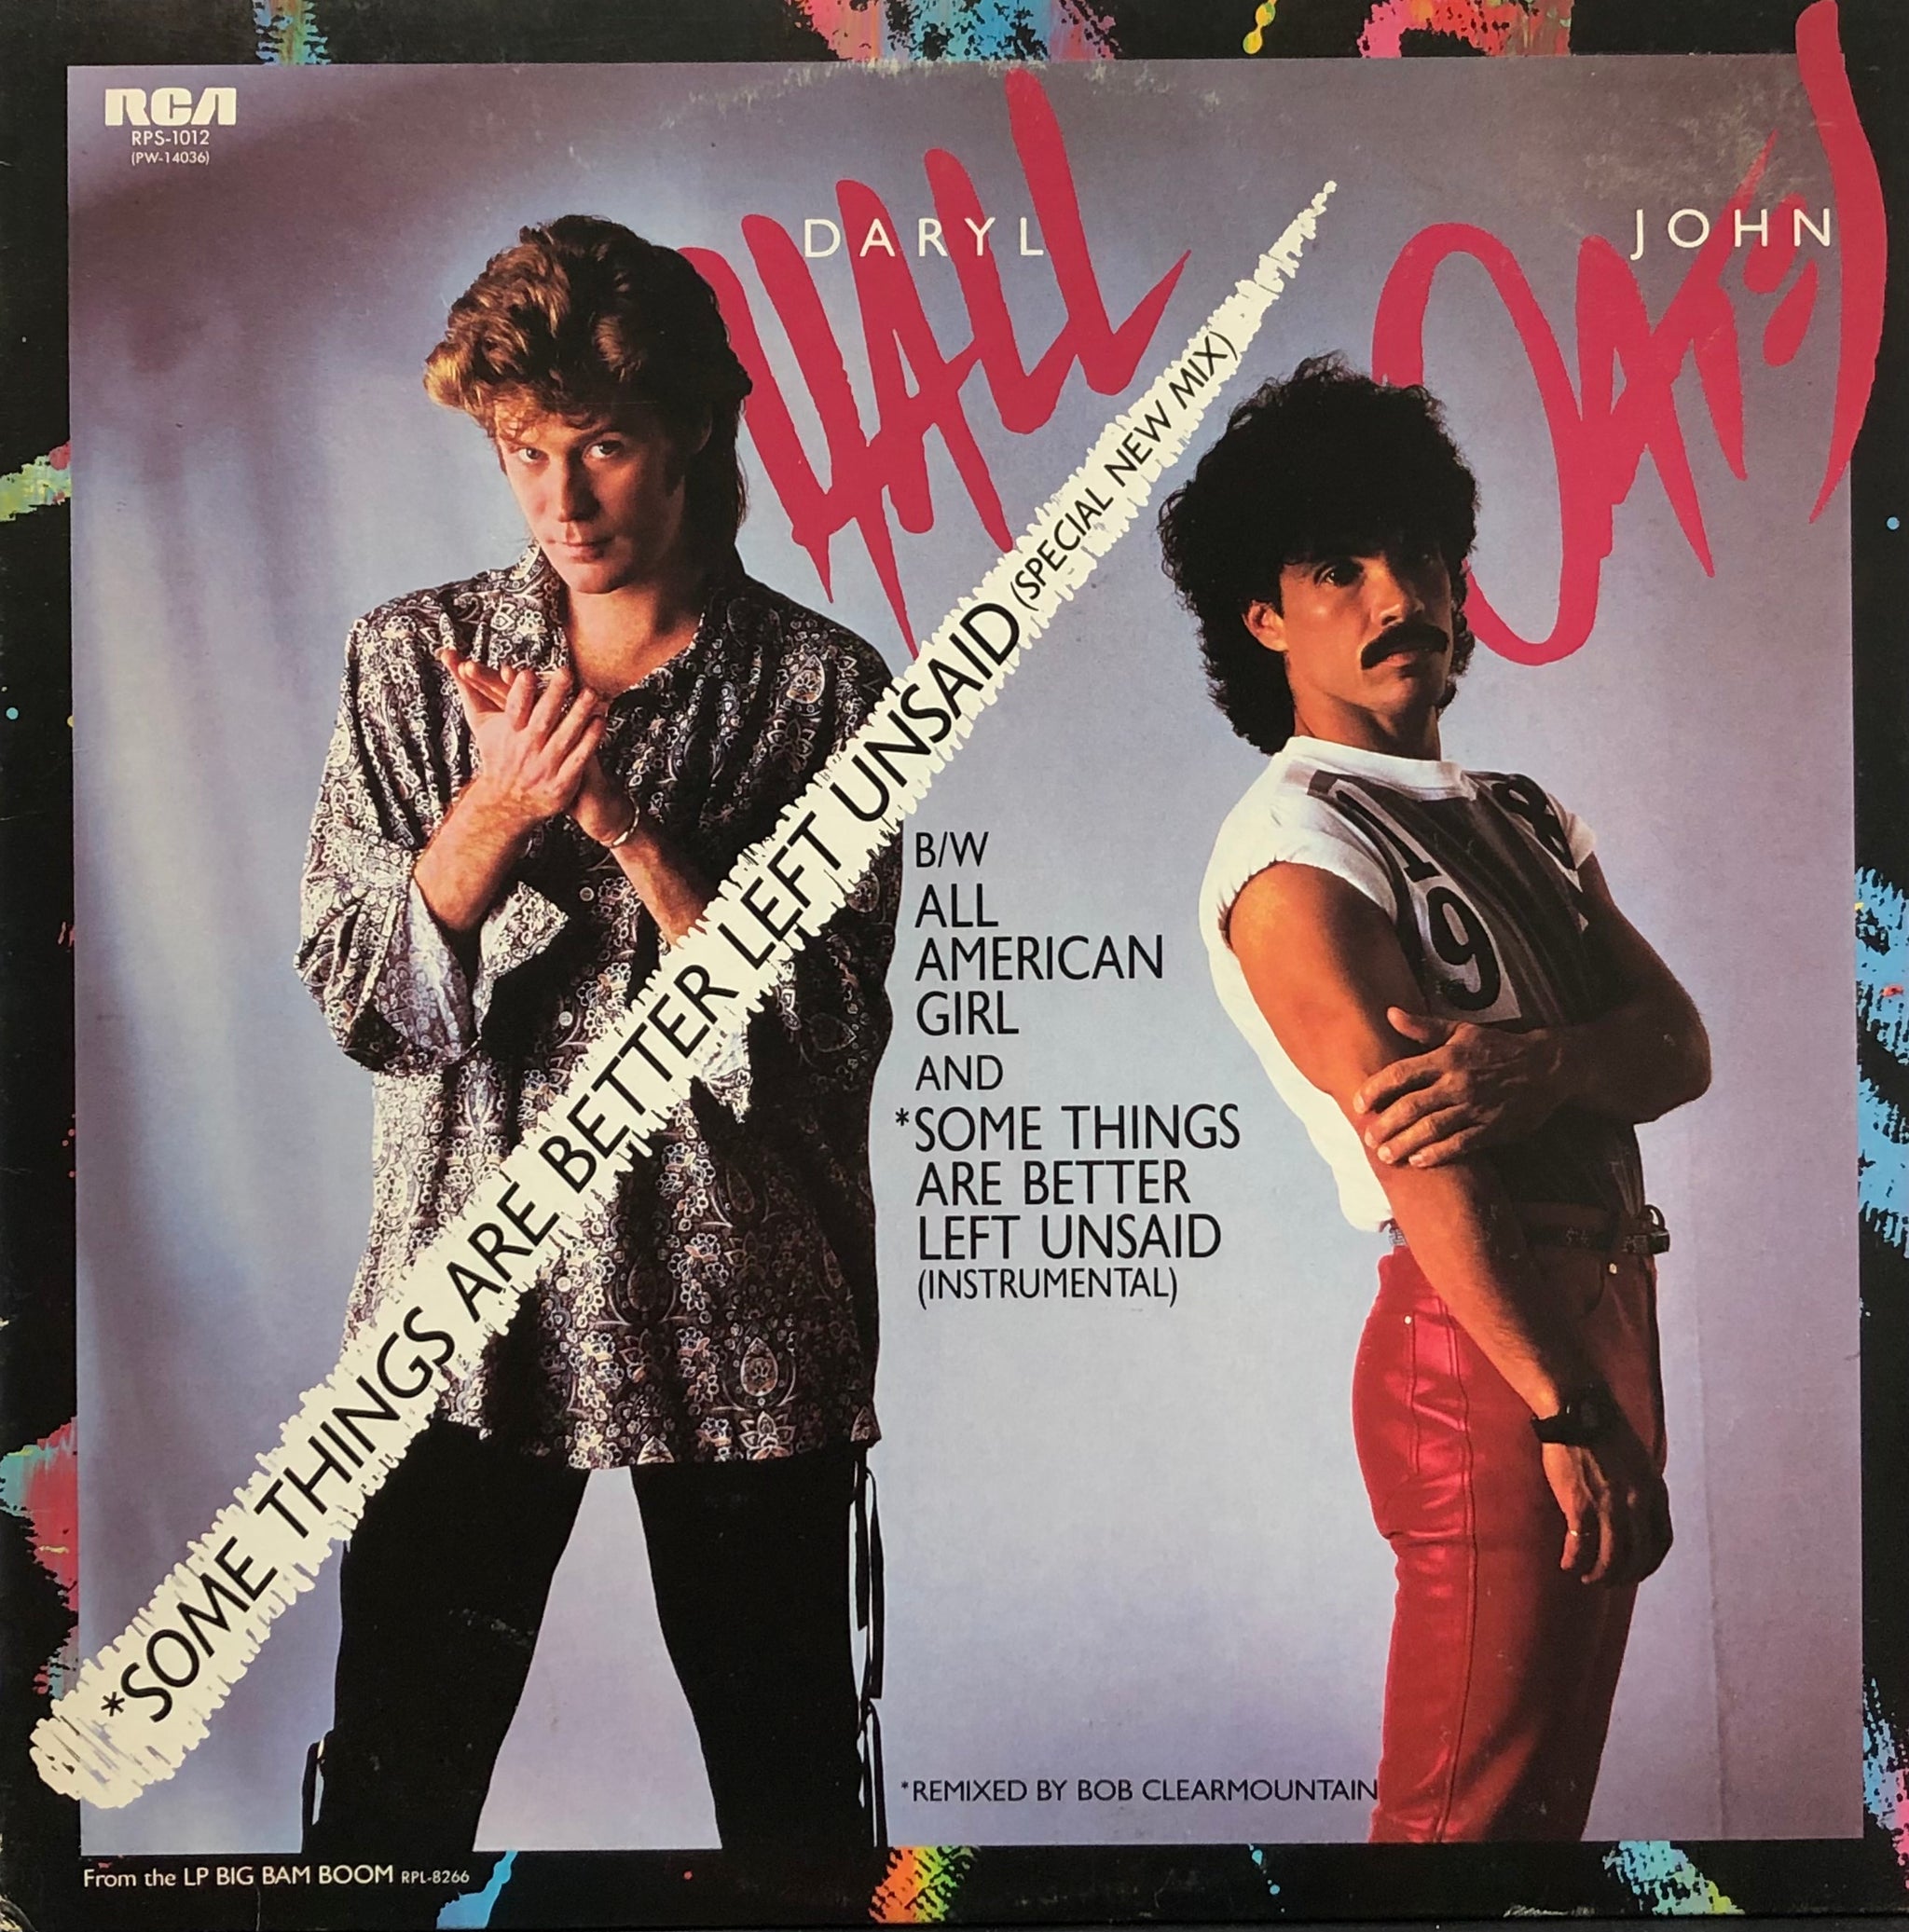 DARYL HALL u0026 JOHN OATES / Some Things Are Better Left Unsaid (RCA